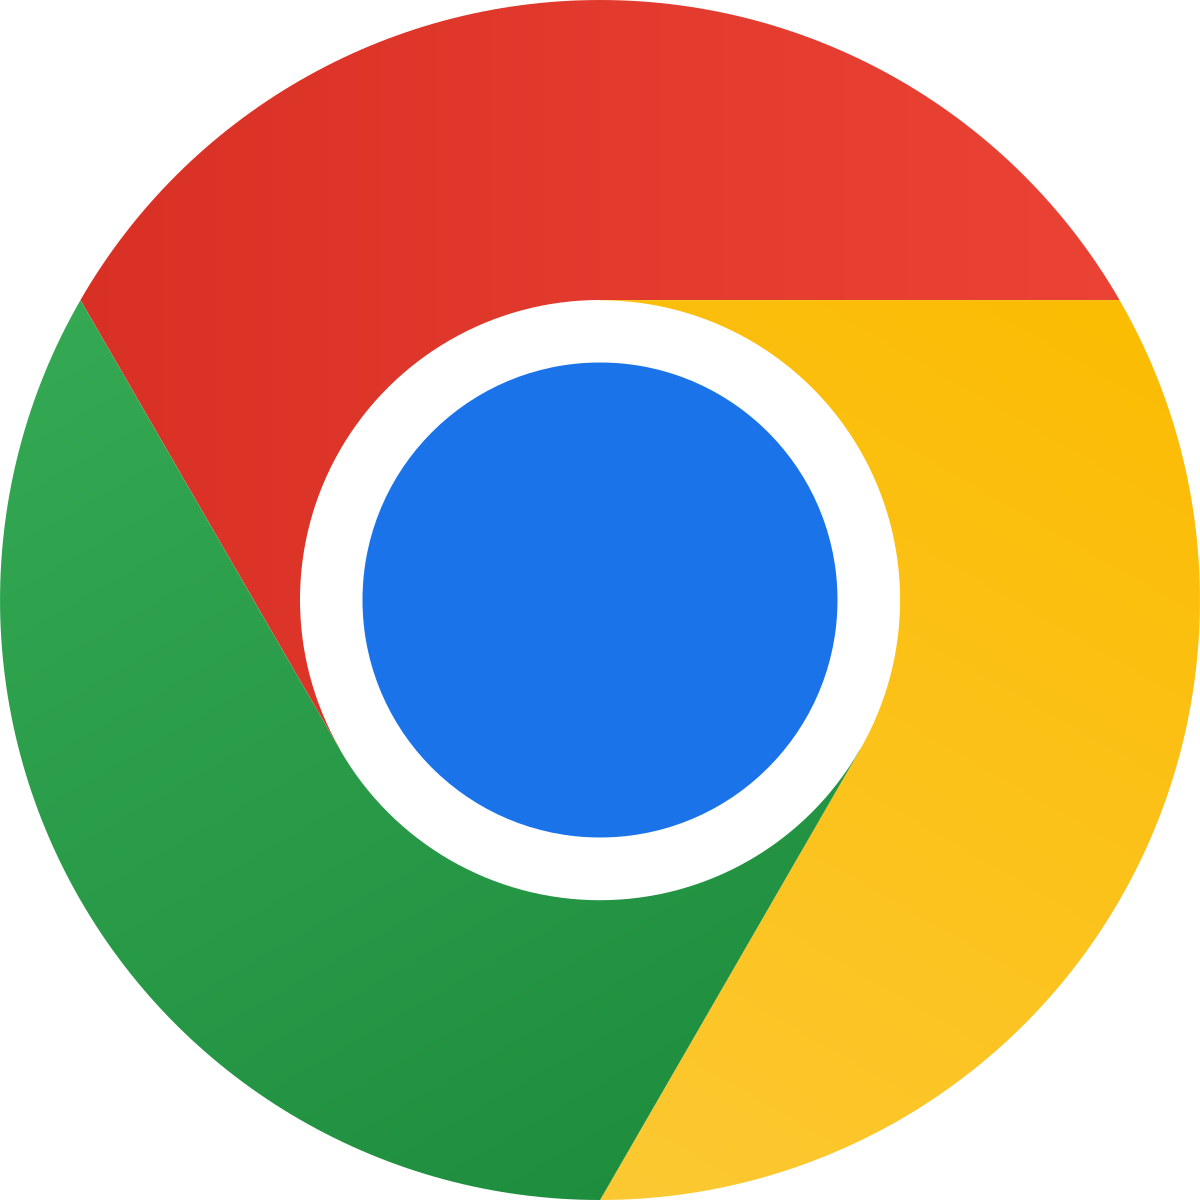 Updated browser icon